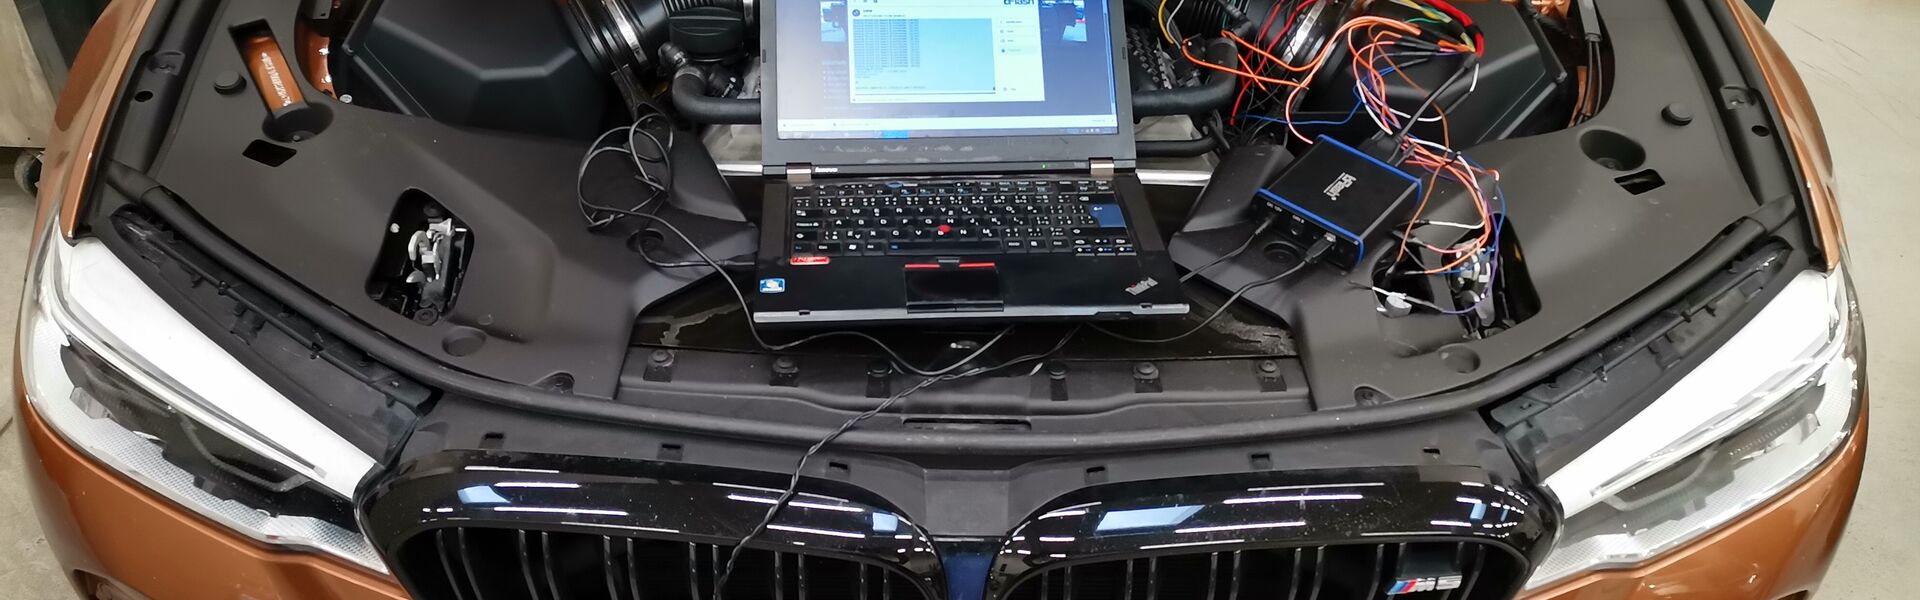 Performance software M5 F90, F90 Competition Stage 1 - 700PS/ 850Nm (Sériový výkon: 600-625PS/750Nm)